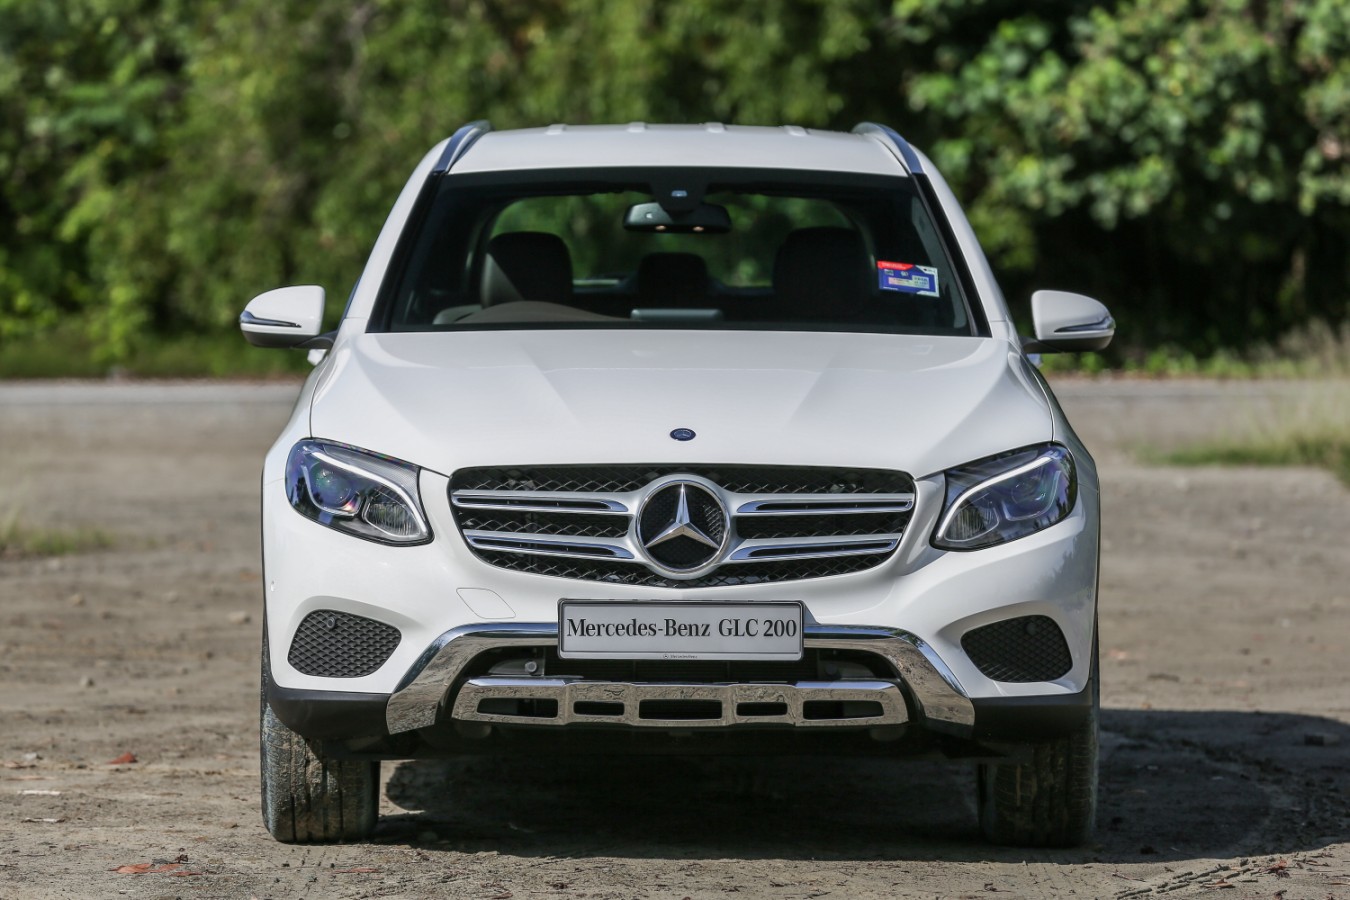 Motoring-Malaysia: Mercedes-Benz Malaysia Launches The GLC 200 - The ...